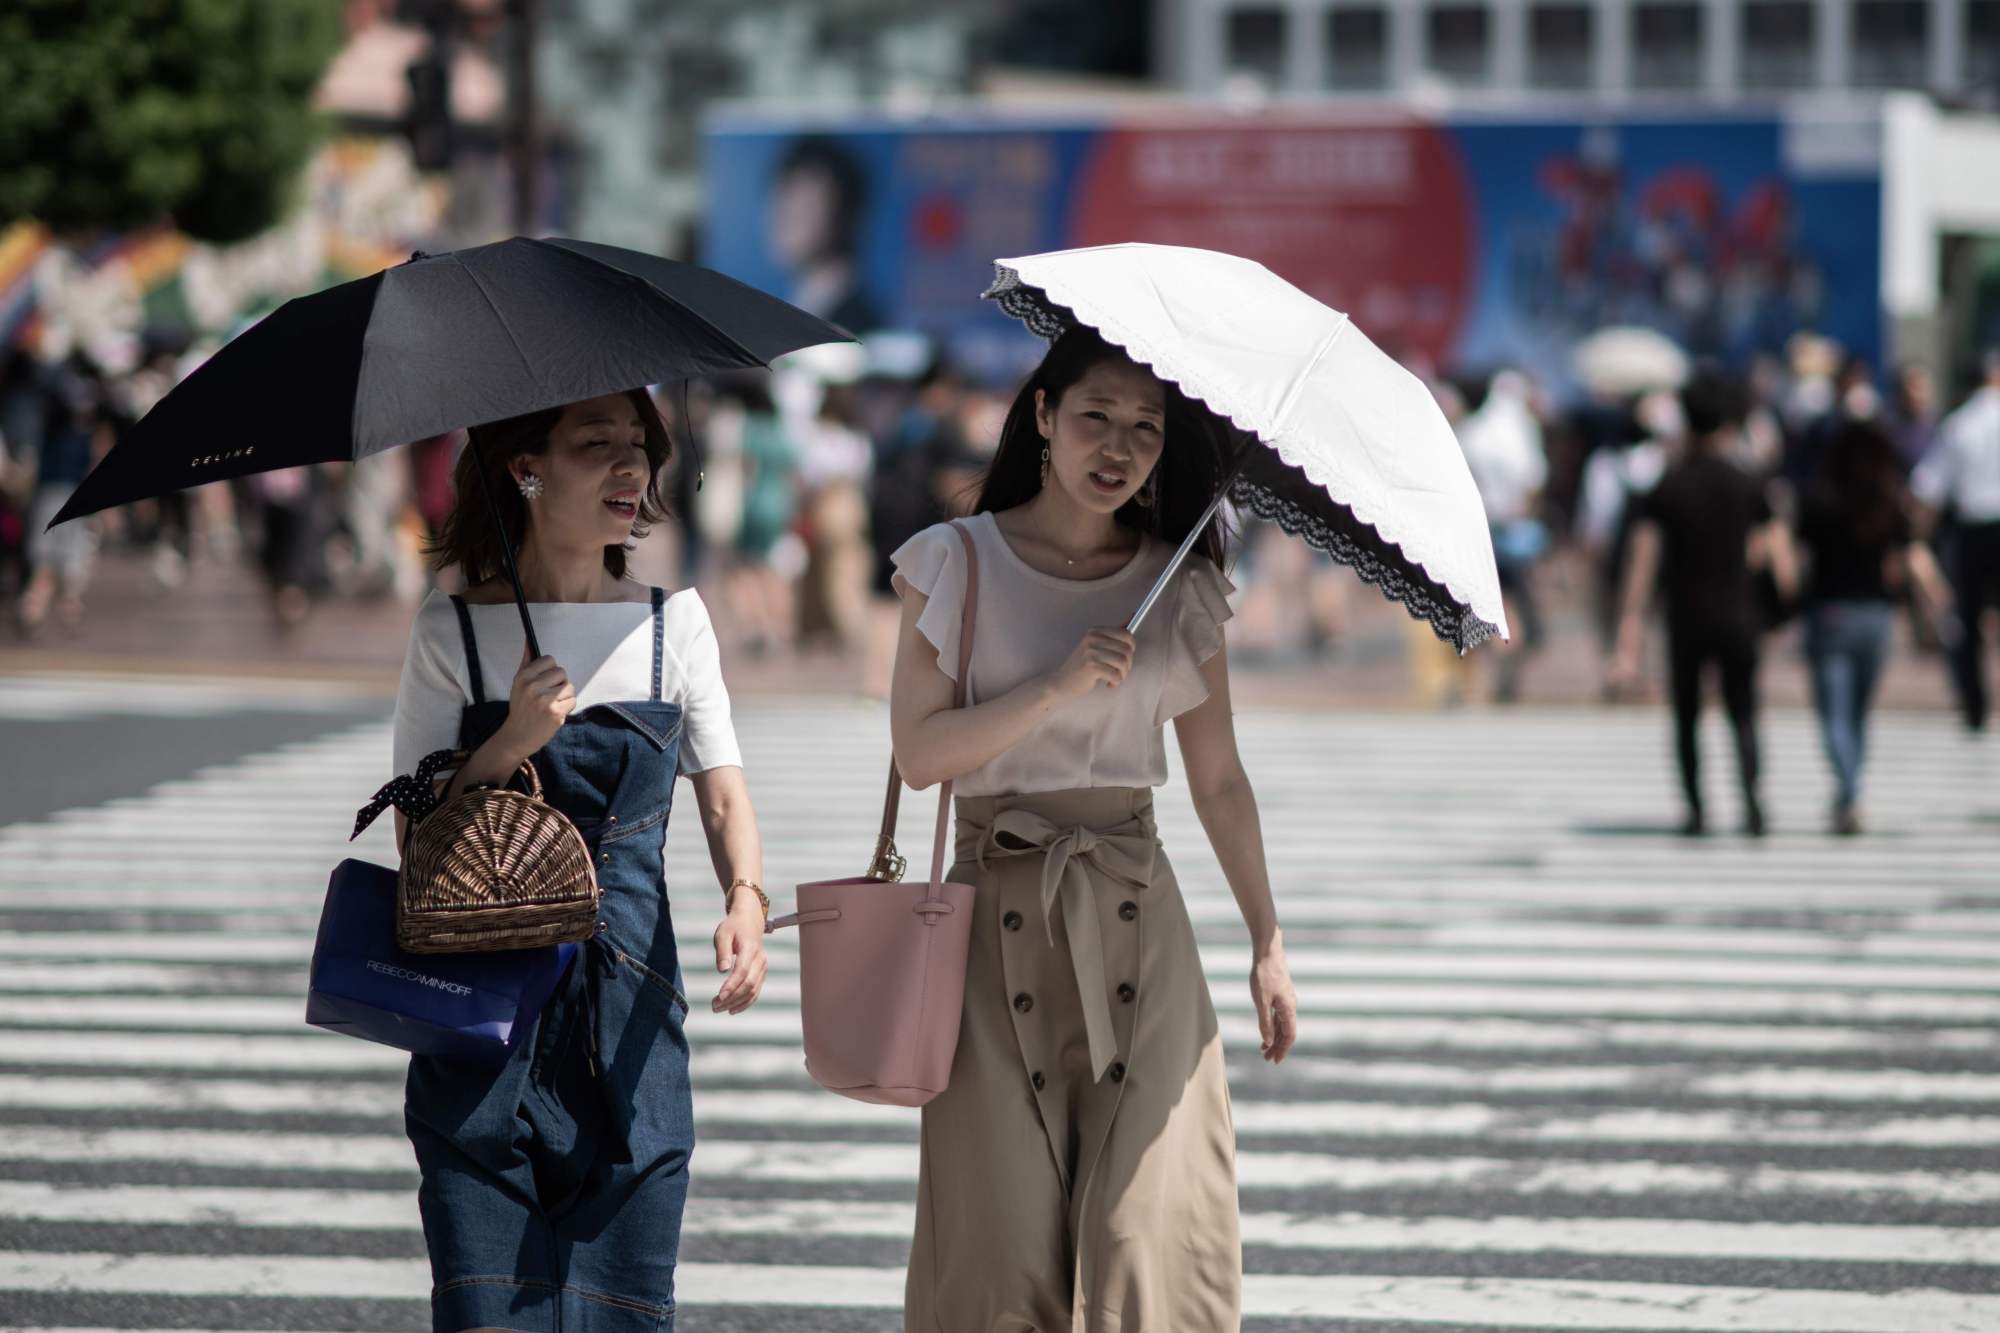 Women shield themselves from the sun with umbrellas in Tokyo on Tuesday as Japan suffers from a heat wave. | AFP-JIJI